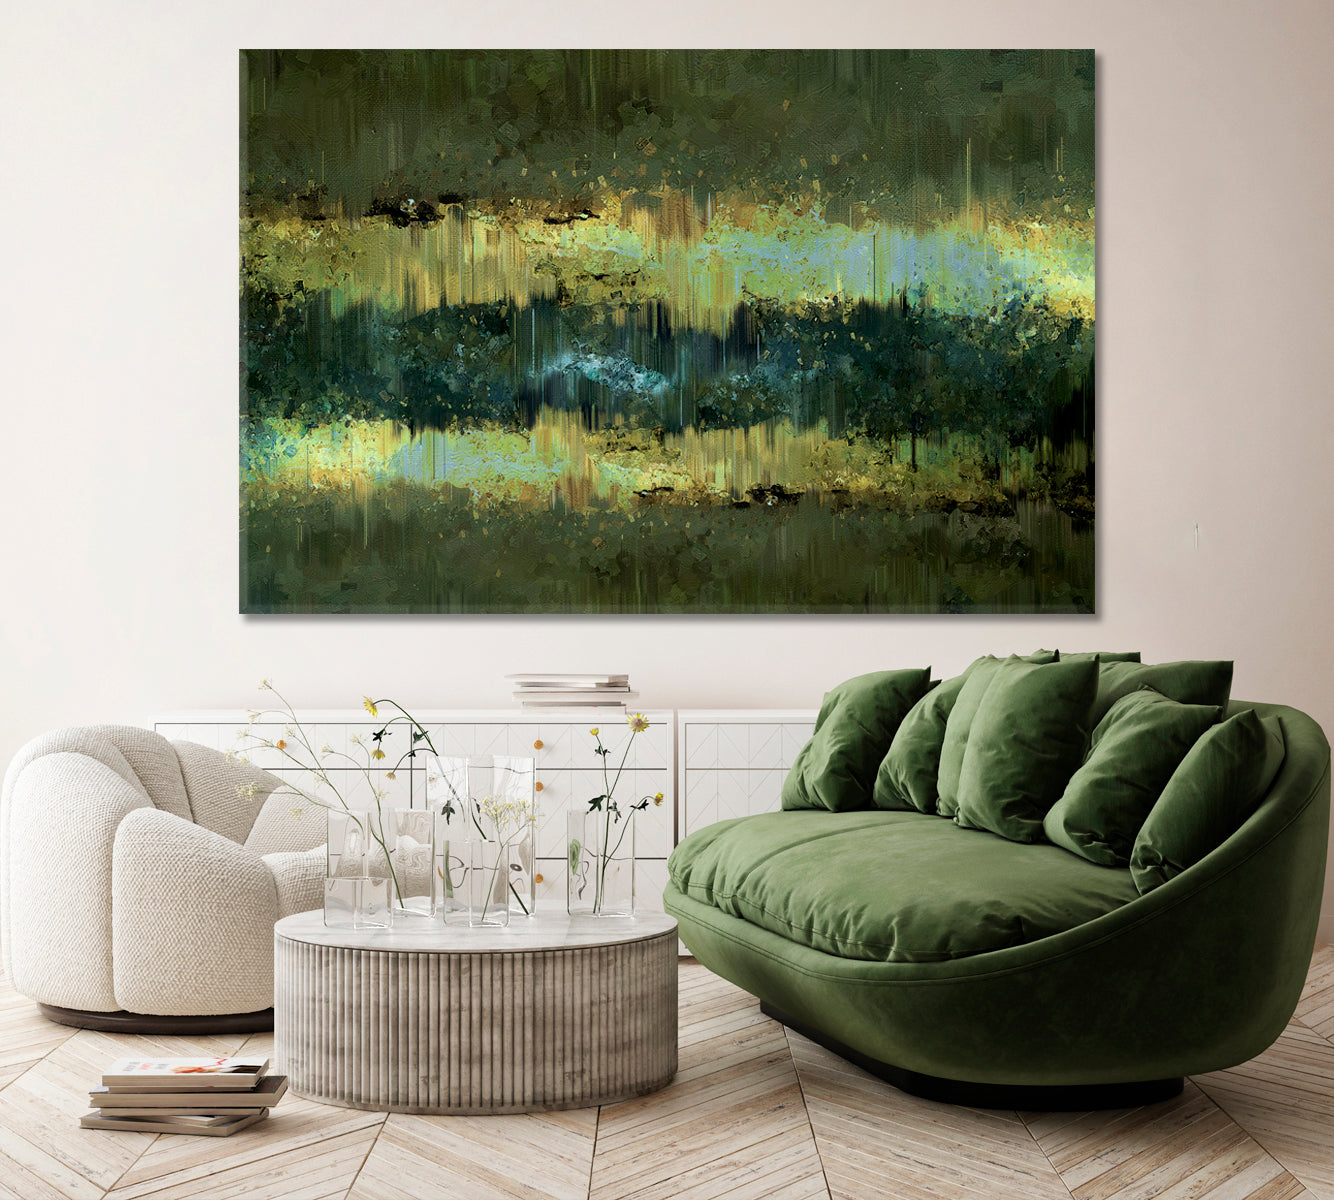 Abstract Grunge Landscape Expressionism Art Canvas Print ArtLexy 1 Panel 24"x16" inches 